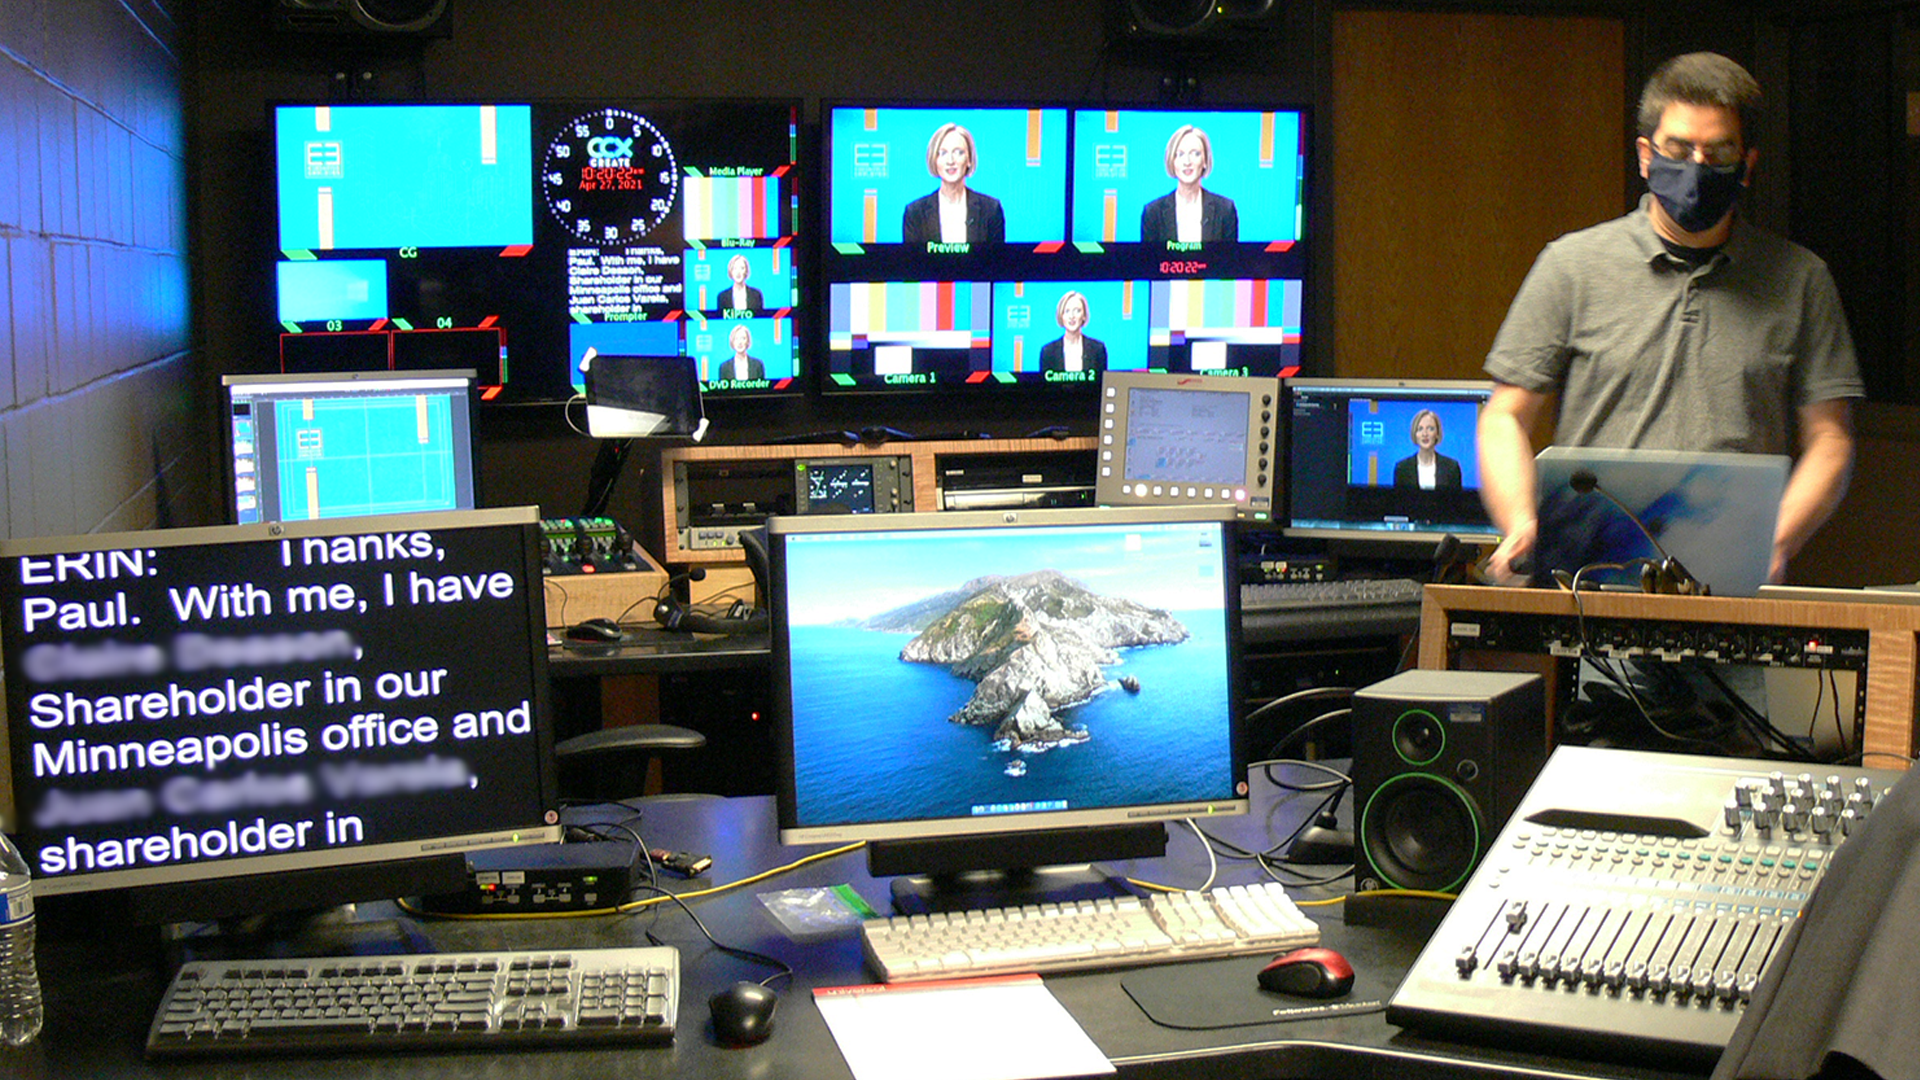 Teleprompter in control room